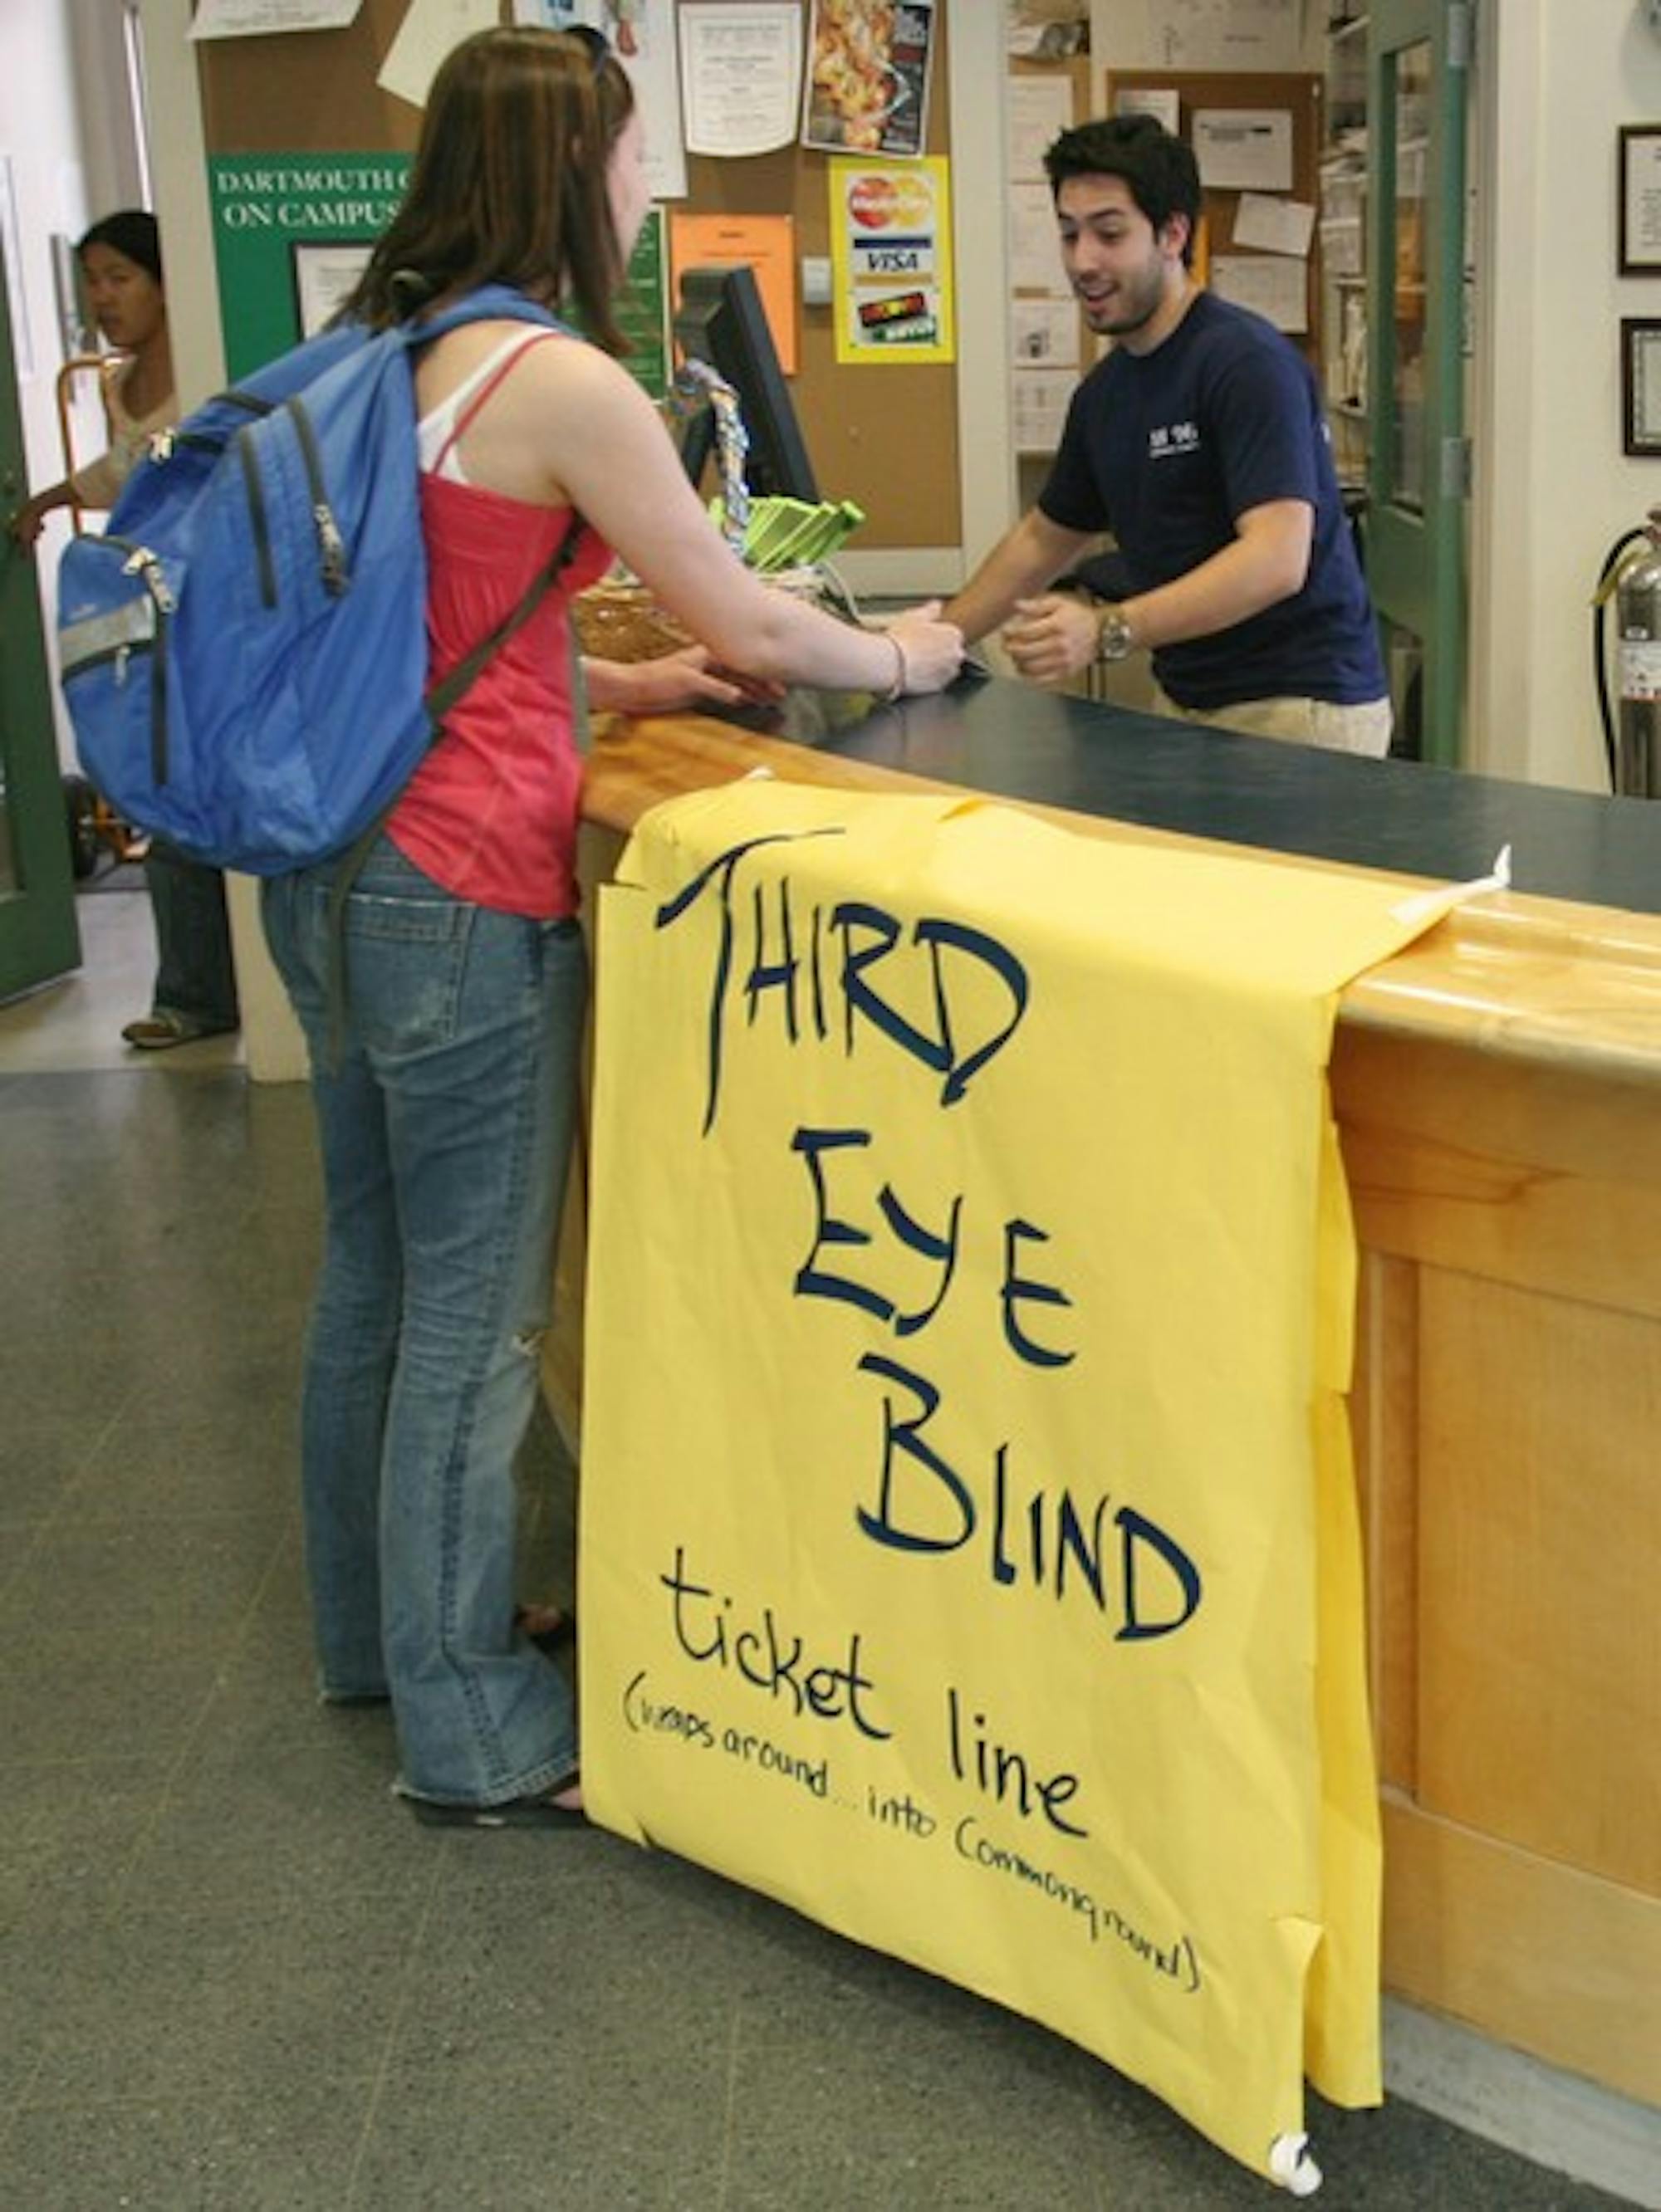 Lauren Breach '09 buys her Third Eye Blind ticket at the Collis Info Desk. The concert has had a tough time selling its tickets at $20 a pop.